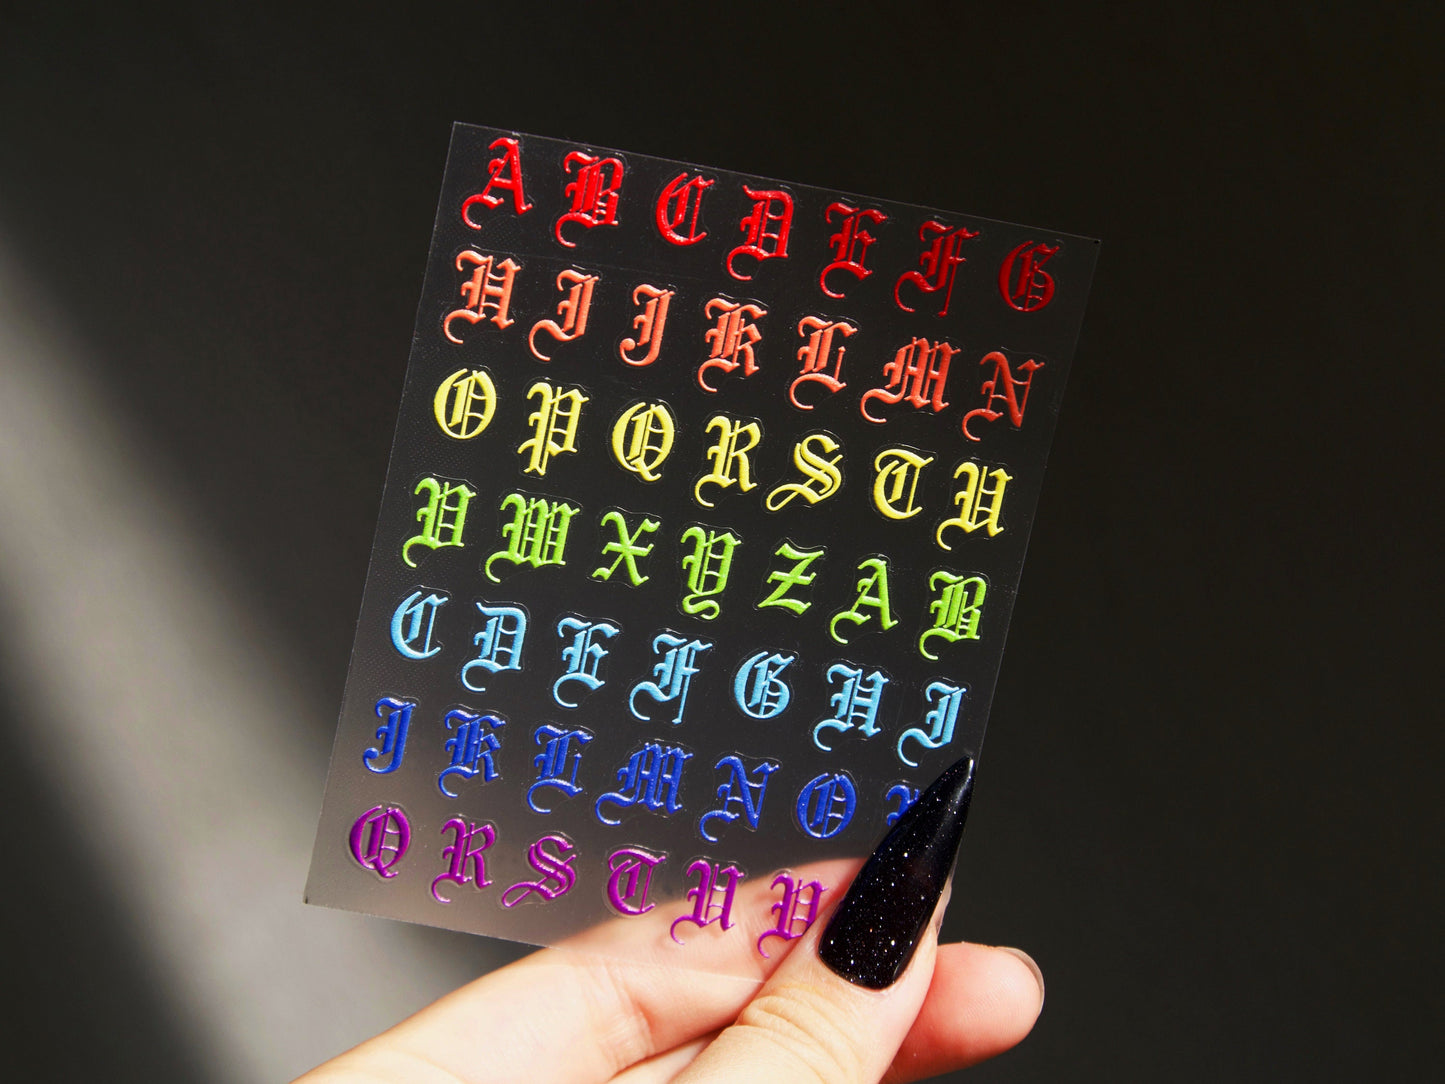 Gothic Script Colorful Nail Art Stickers Decals/ 3D Embossed Gothic minuscule Hand Writing holographic Retro Letters Alphabet Letters